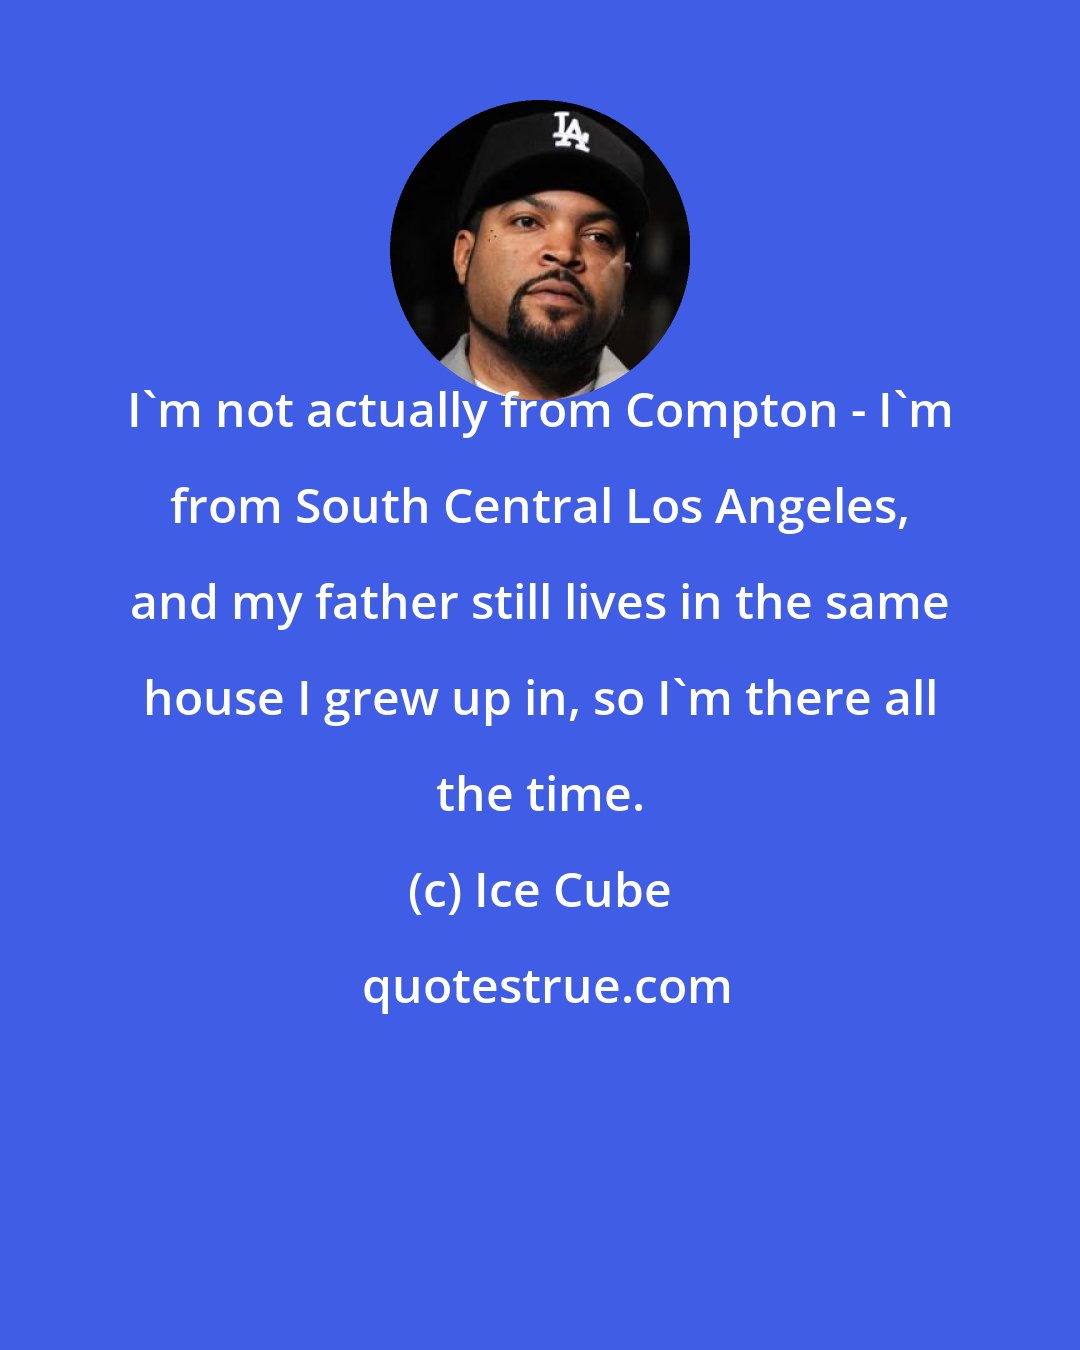 Ice Cube: I'm not actually from Compton - I'm from South Central Los Angeles, and my father still lives in the same house I grew up in, so I'm there all the time.